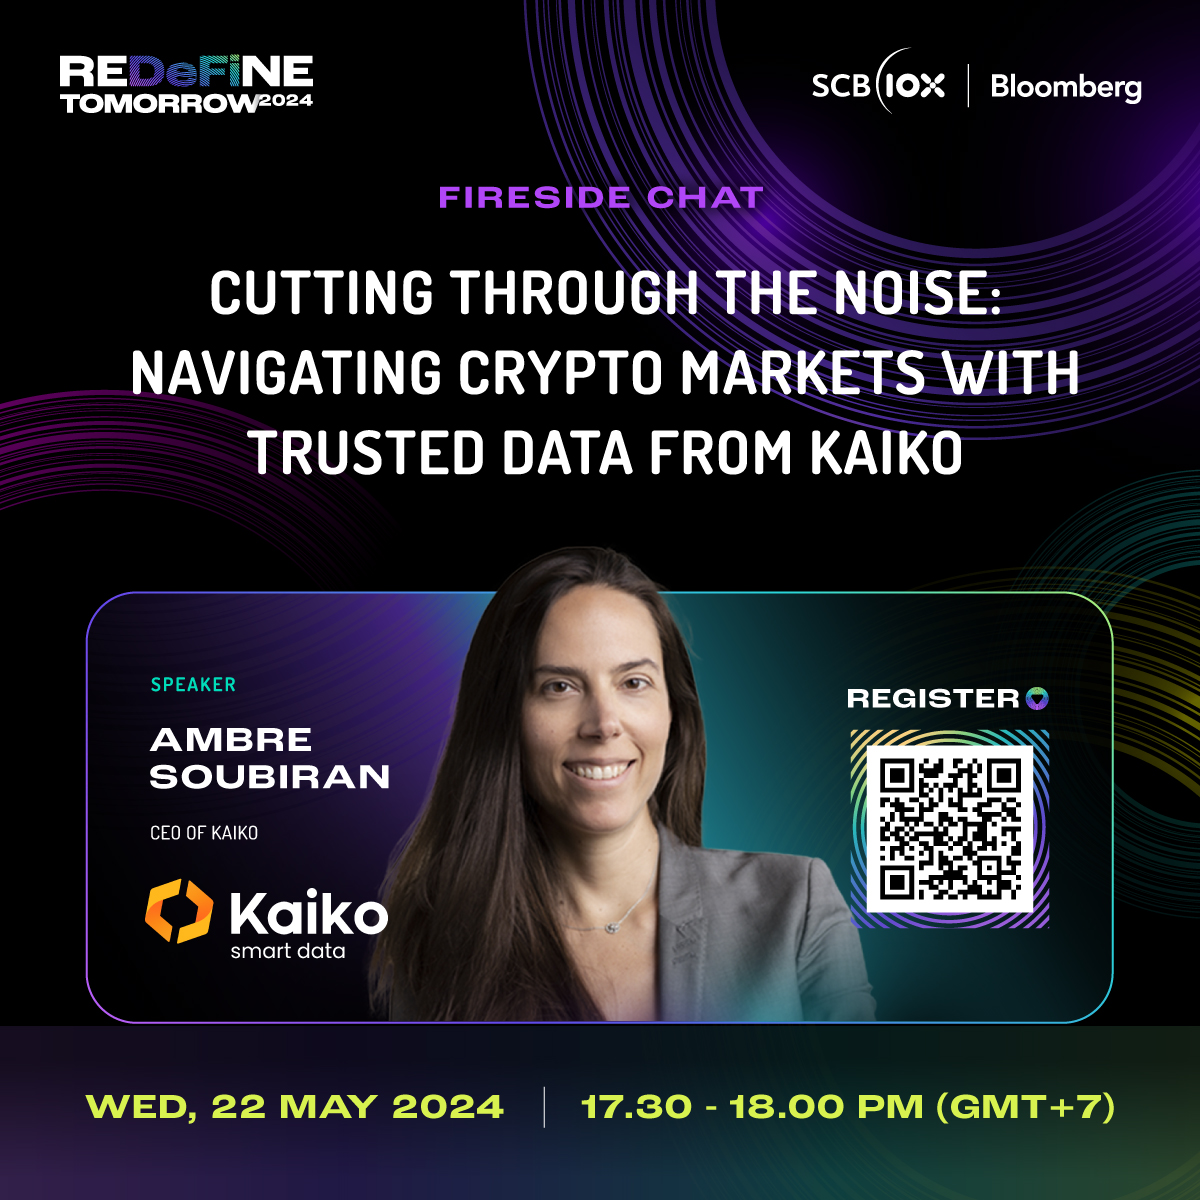 Meet the speaker at #REDeFiNETOMORROW2024 / 21-22 May 2024 Fireside Chat: Cutting Through the Noise: Navigating Crypto Markets with Trusted Data from Kaiko @ambresoub of @KaikoData Free ticket: bloombergevents.com/SCB10x_2024